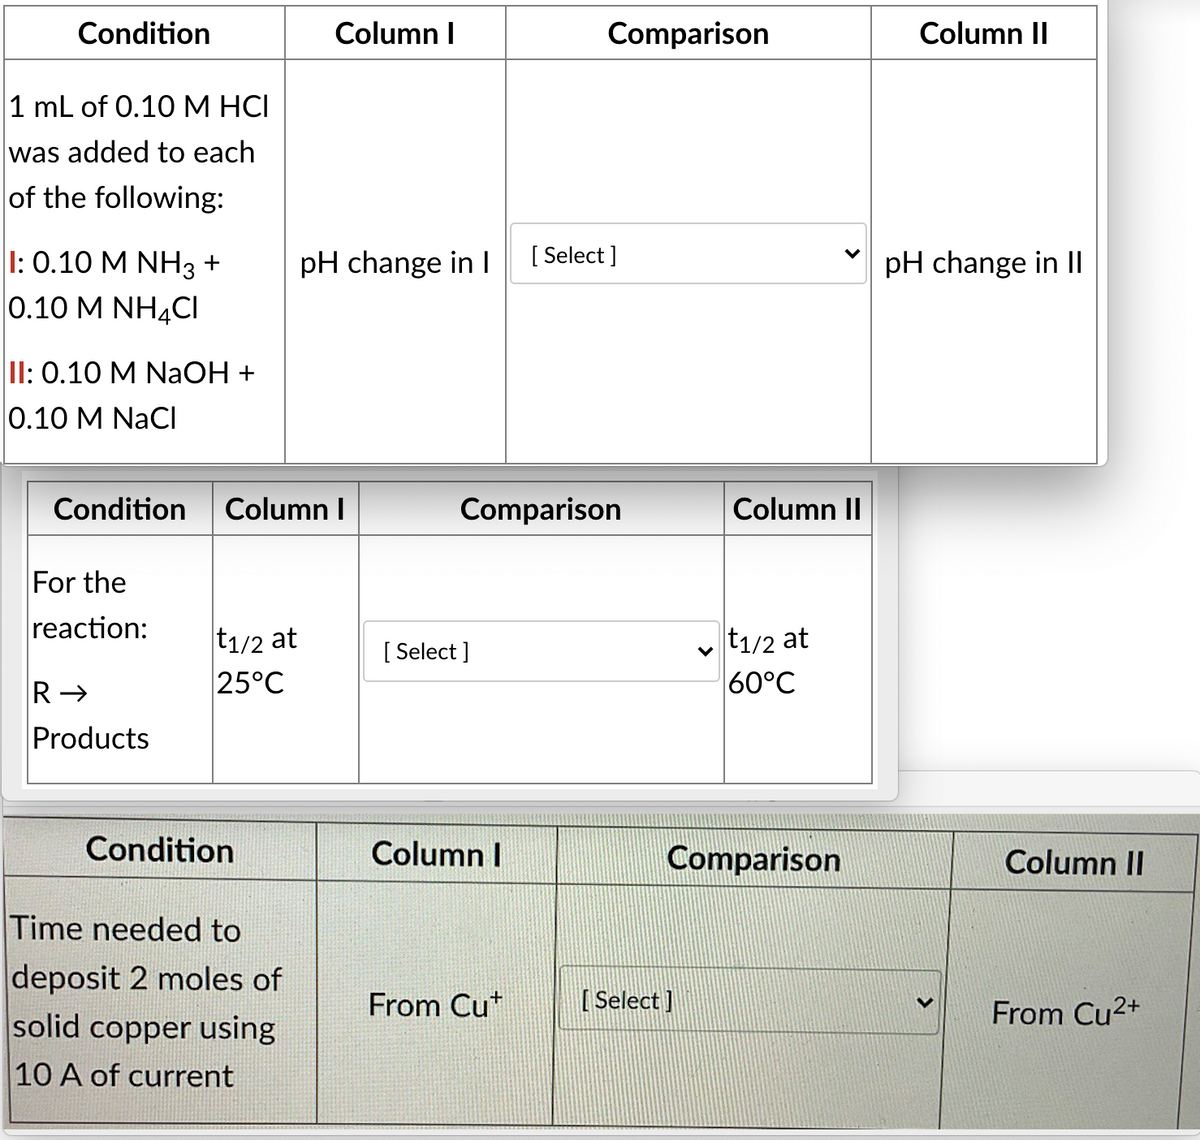 Condition
Column I
Comparison
Column II
1 mL of 0.10 M HCI
was added to each
of the following:
[ Select ]
1: 0.10 M NH3 +
0.10 M NH4CI
pH change in I
pH change in II
II: 0.10 M NaOH +
0.10 M NaCl
Condition
Column I
Comparison
Column II
For the
reaction:
t1/2 at
25°C
t1/2 at
60°C
[ Select ]
Products
Condition
Column I
Comparison
Column II
Time needed to
deposit 2 moles of
solid copper using
From Cut
[ Select]
From Cu2+
10 A of current
>
